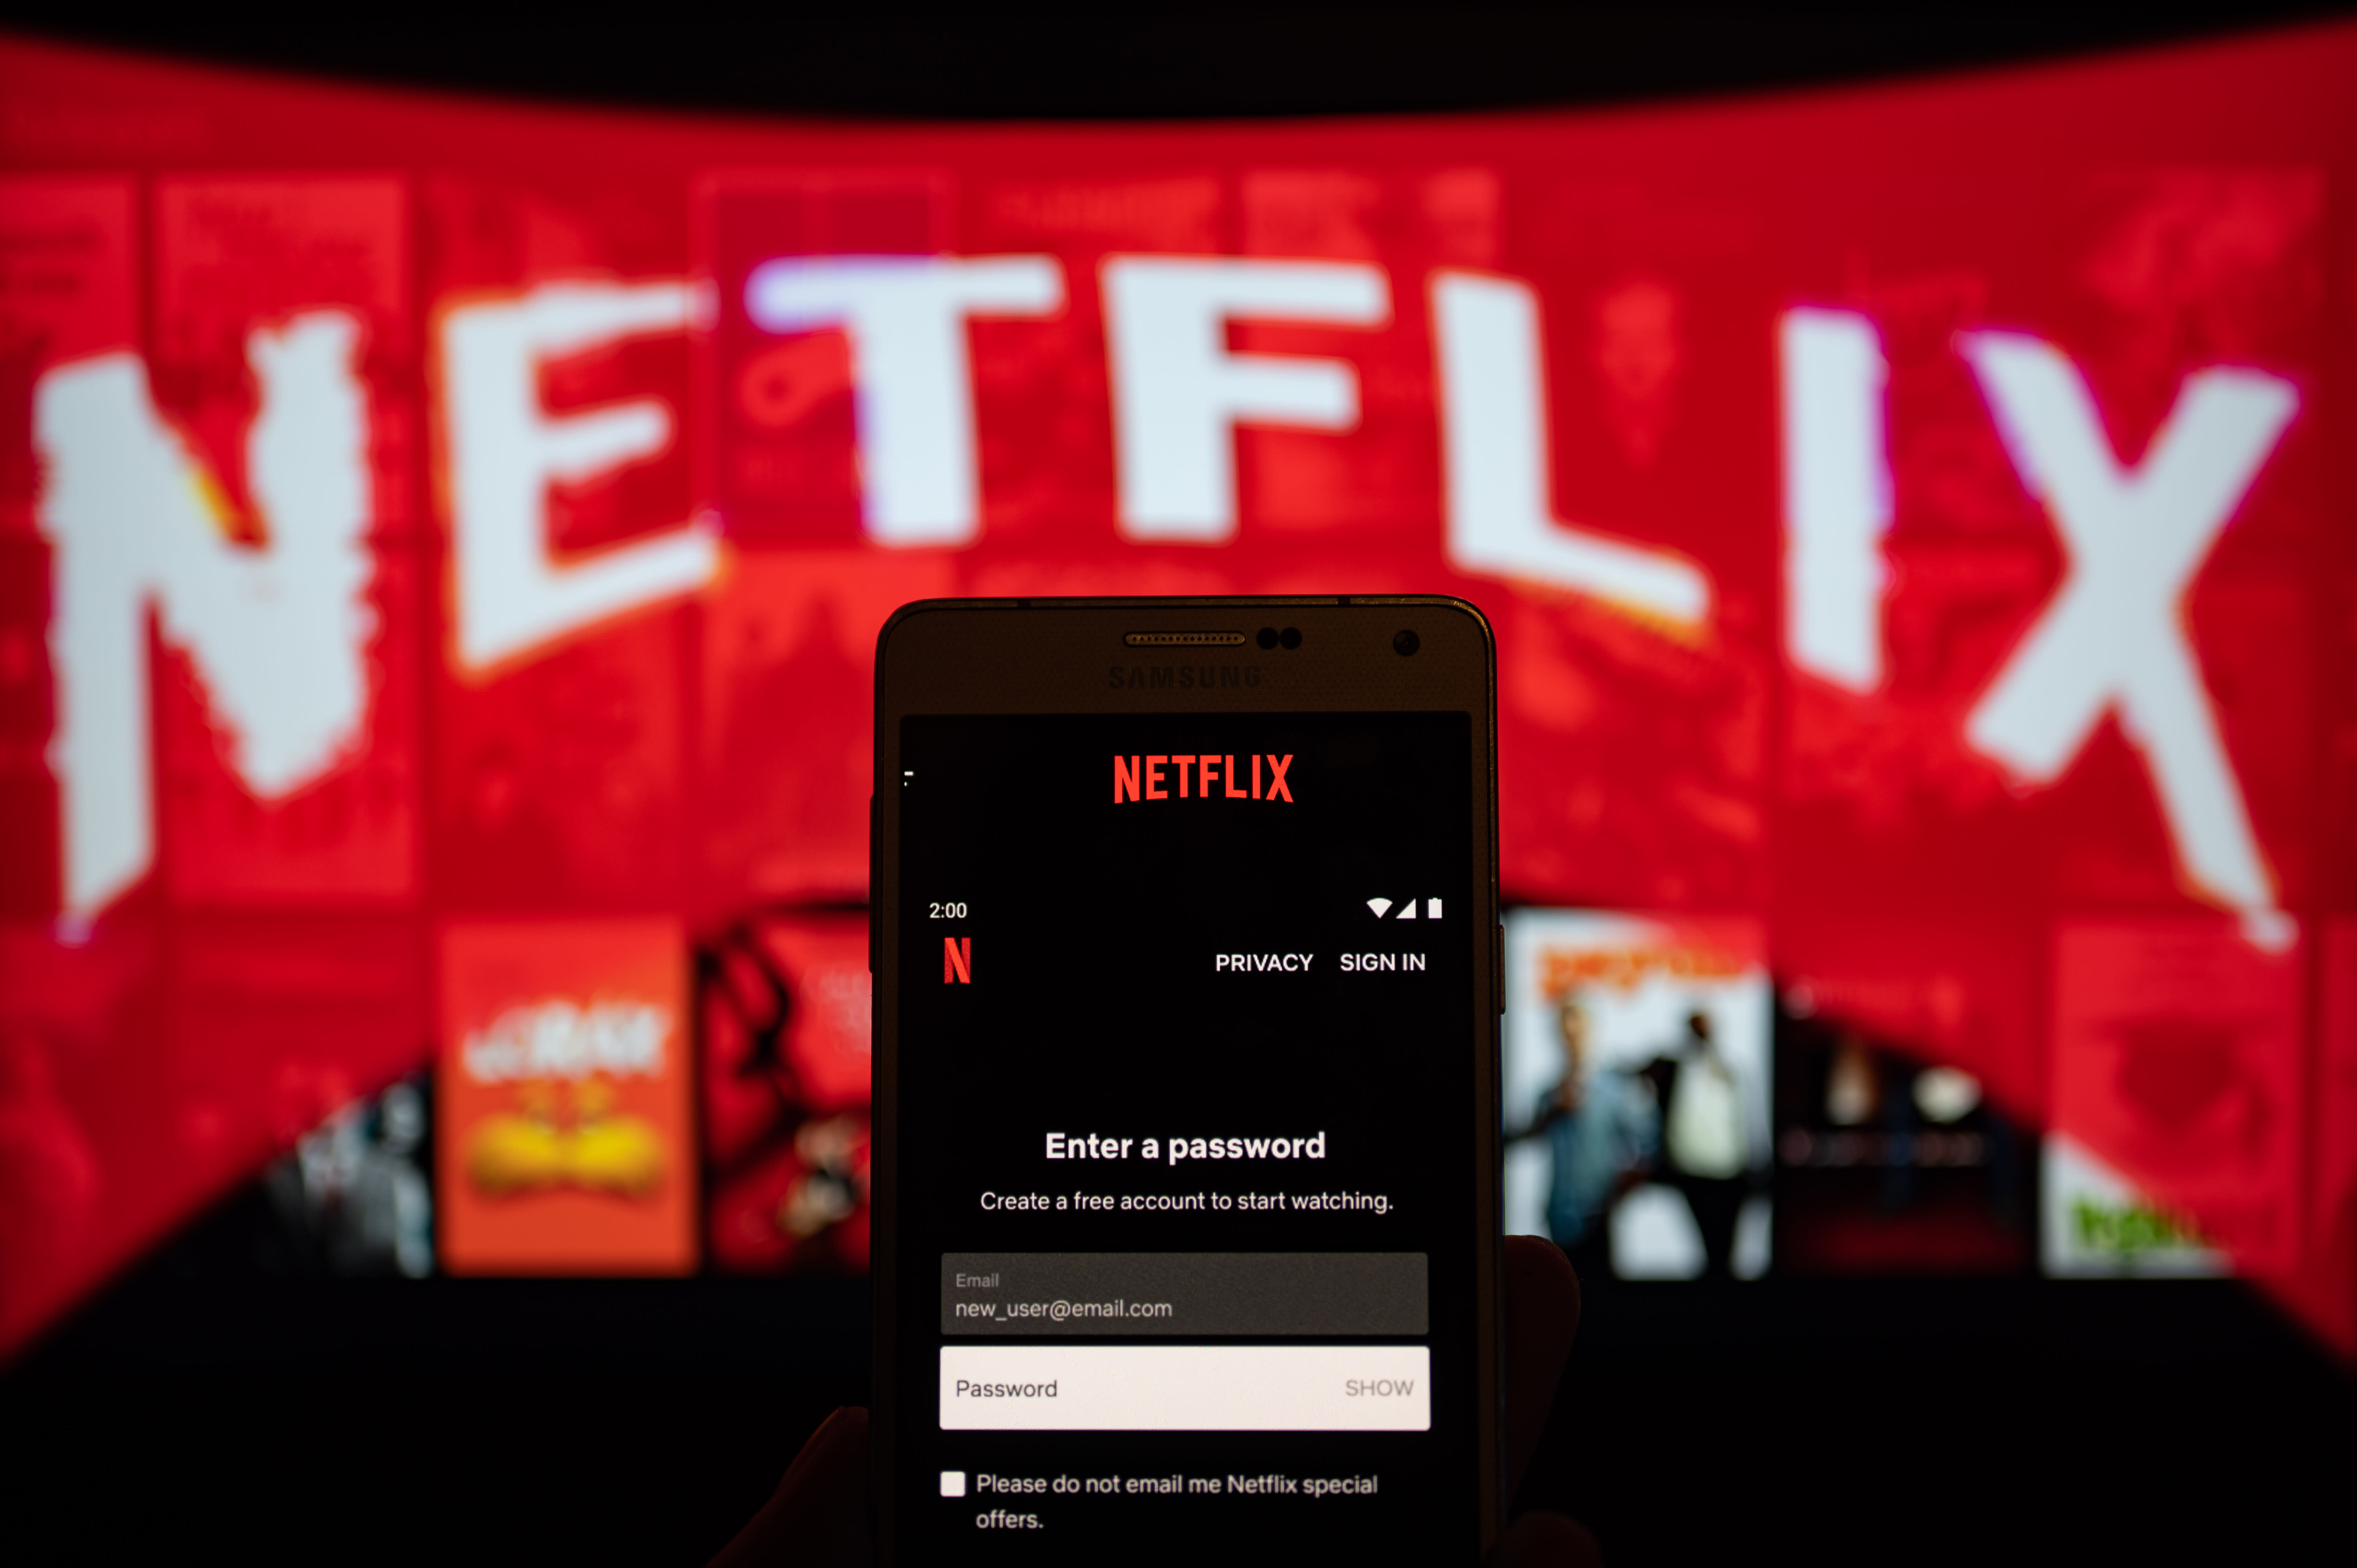 Password sharing crackdown in U.S. can lead to big gains for Netflix, Oppenheimer says